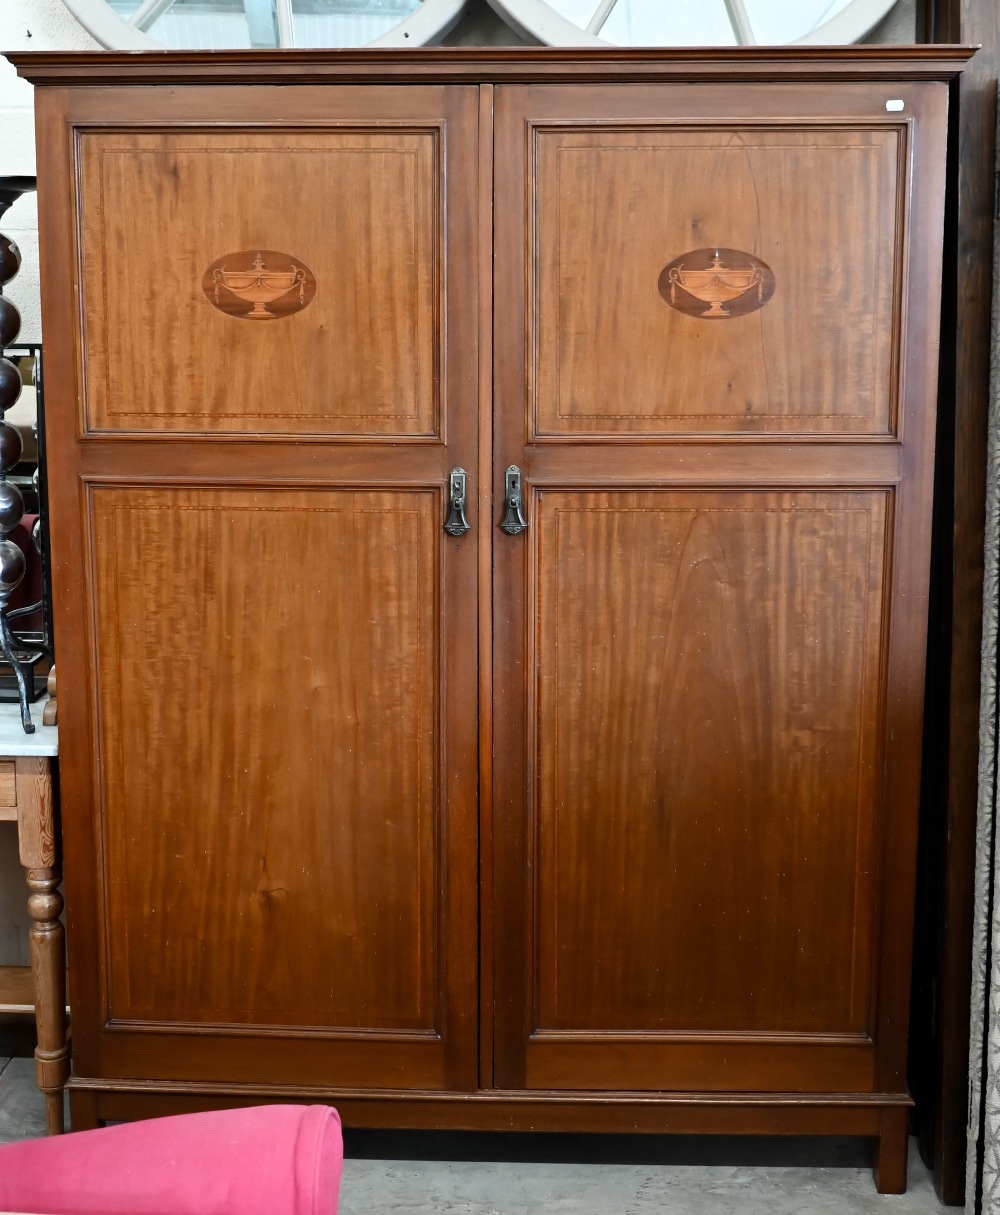 'Sopwith & Co Newcastle upon Tyne' Sheraton revival compactum wardrobe with twin-panelled doors